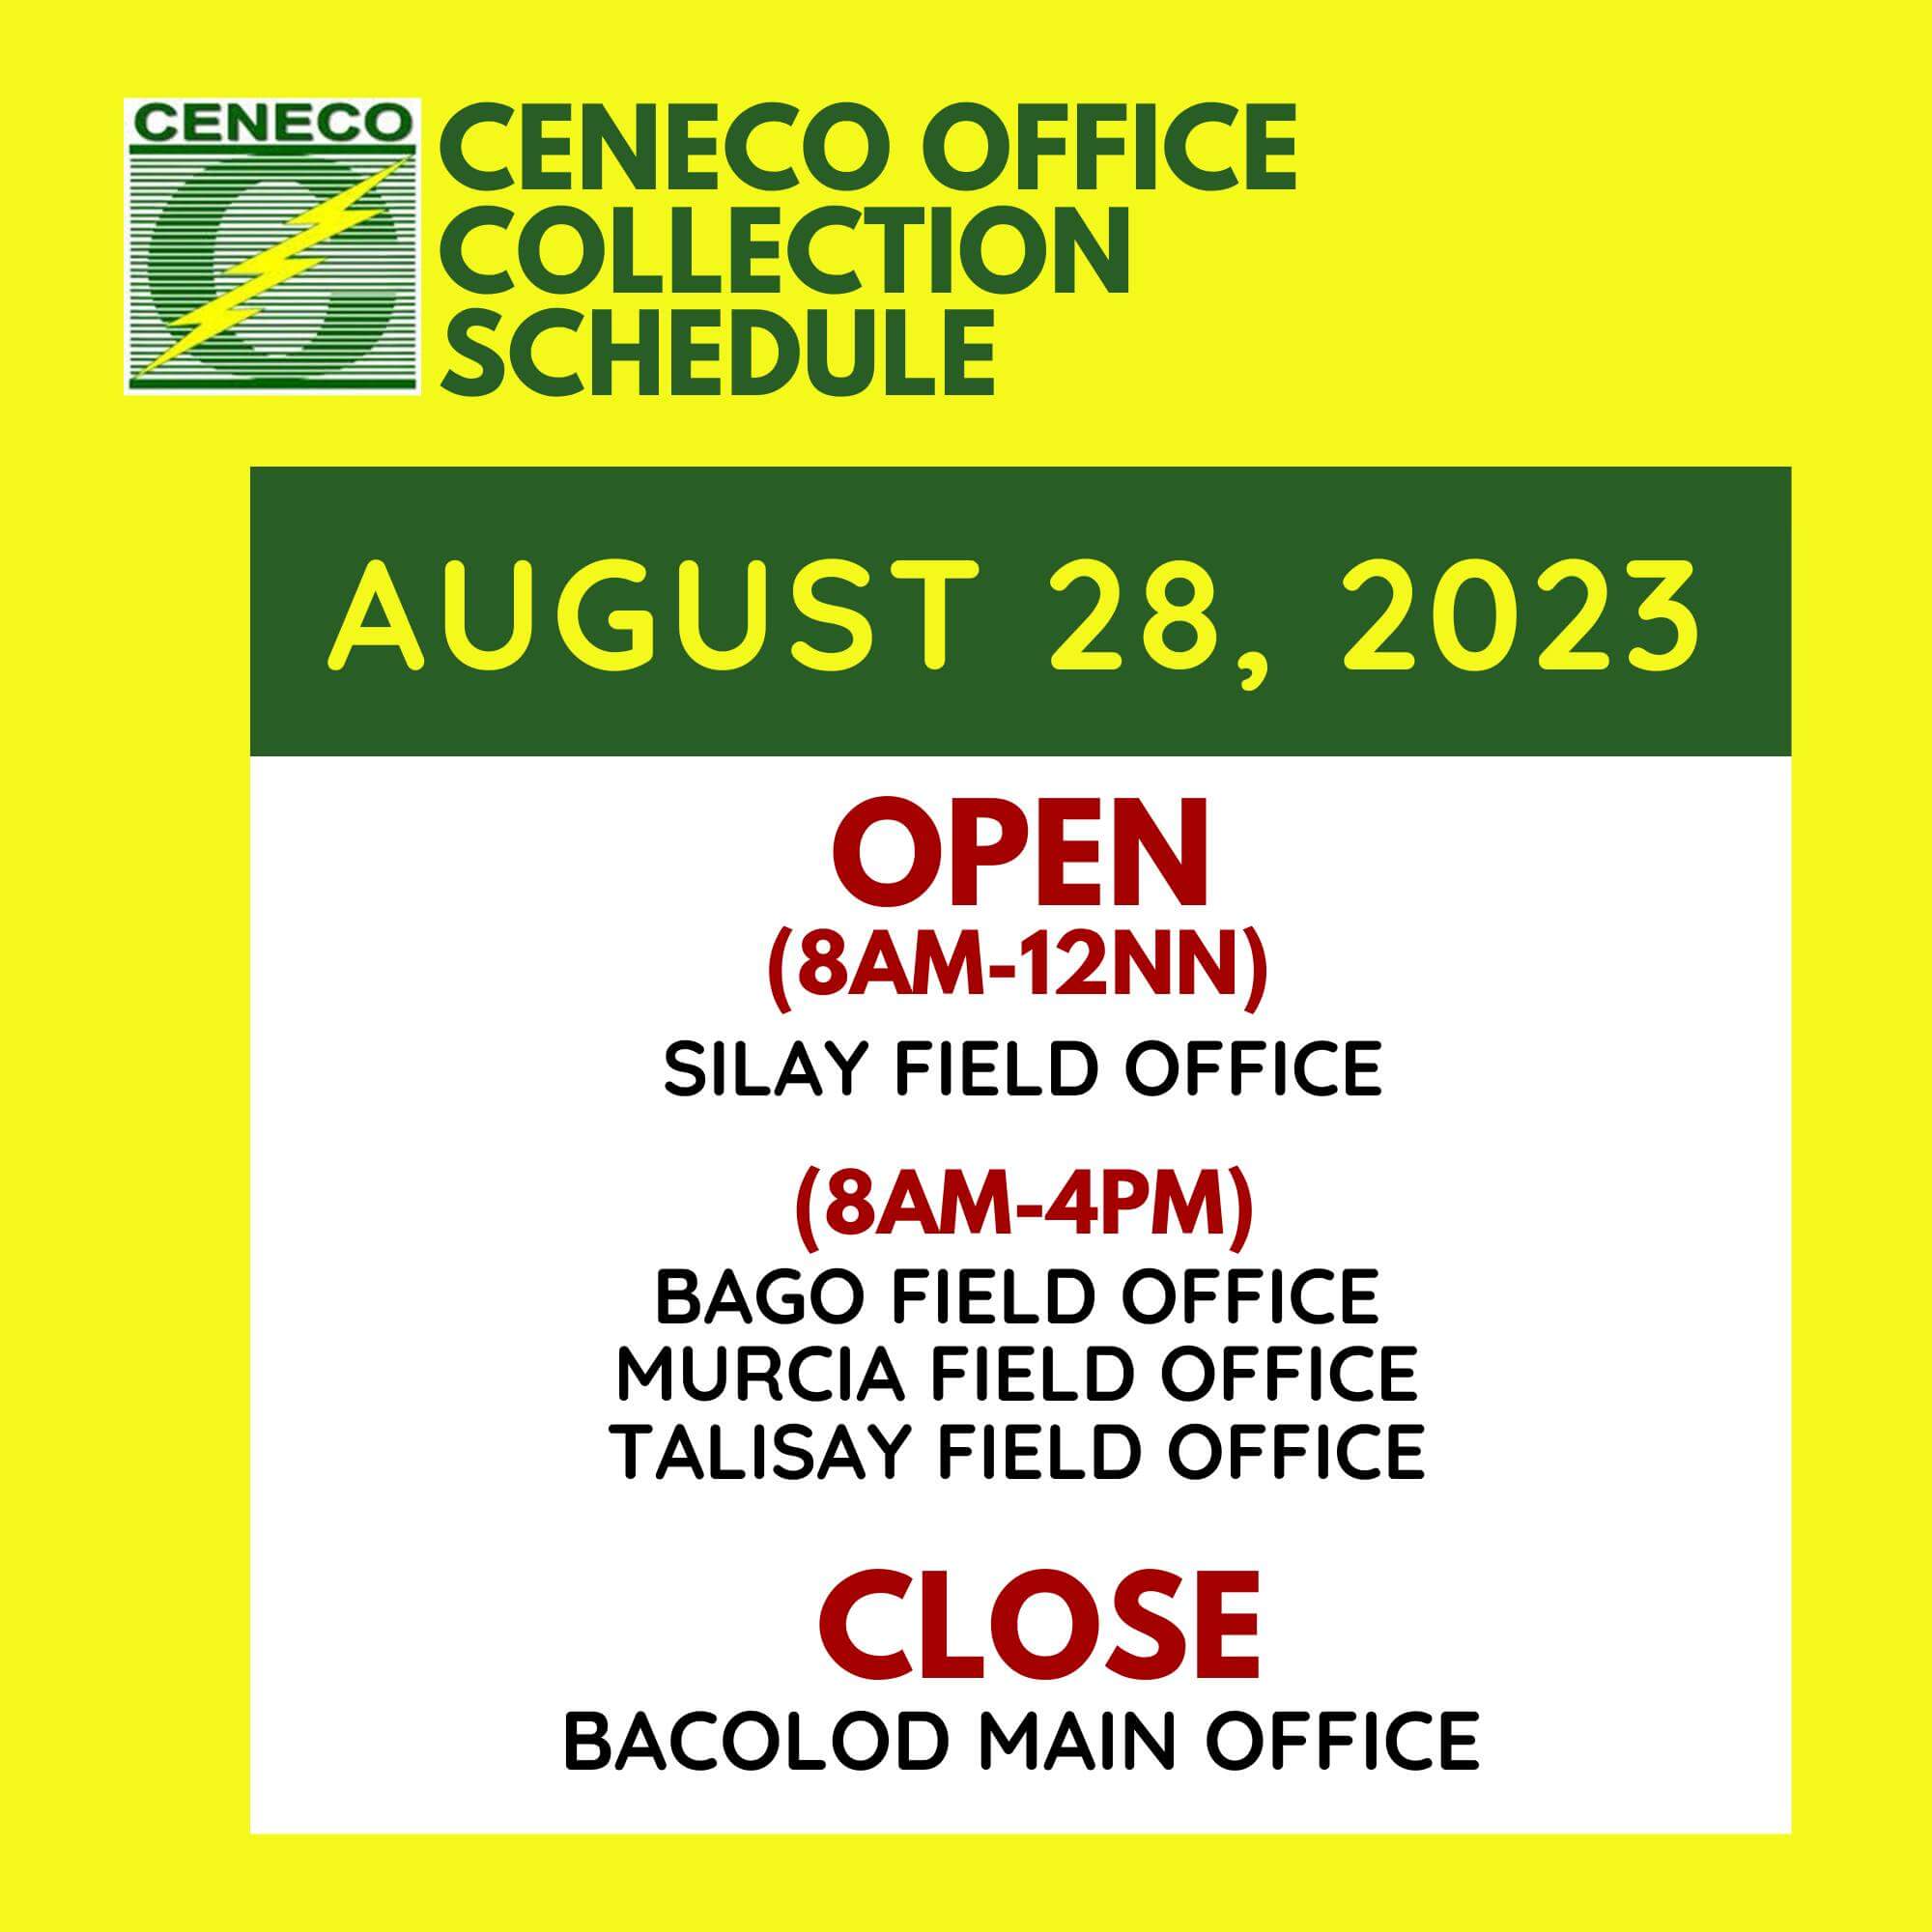 CENECO Office Collection Schedule for National Heroes’ Day - Central